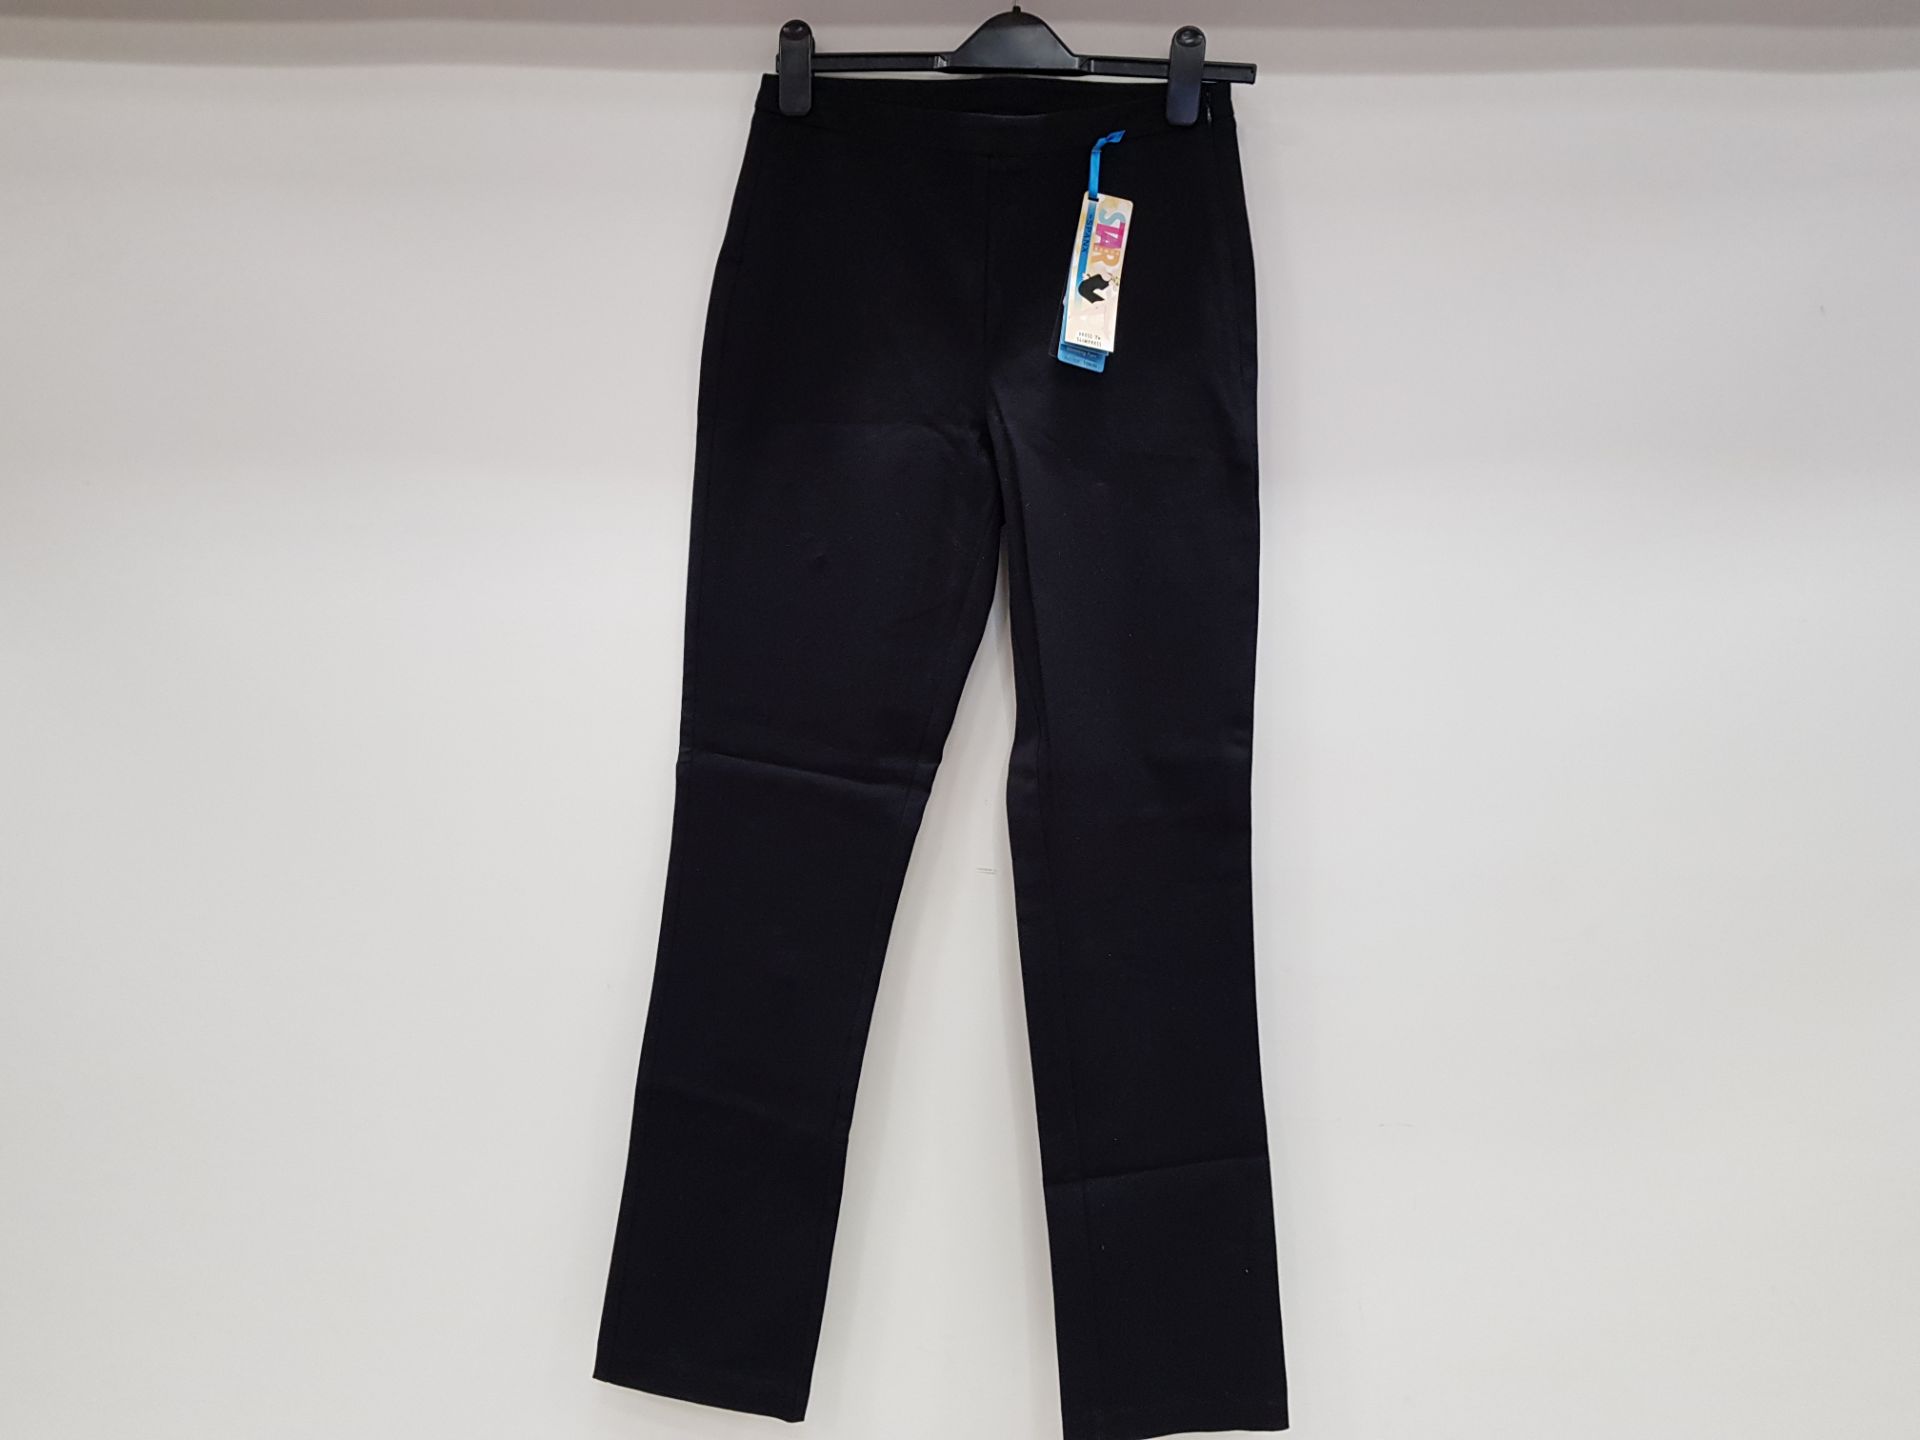 APPROX 10 X BRAND NEW SPANX SLIMMING PANTS SIZE 4 US RRP $108.00